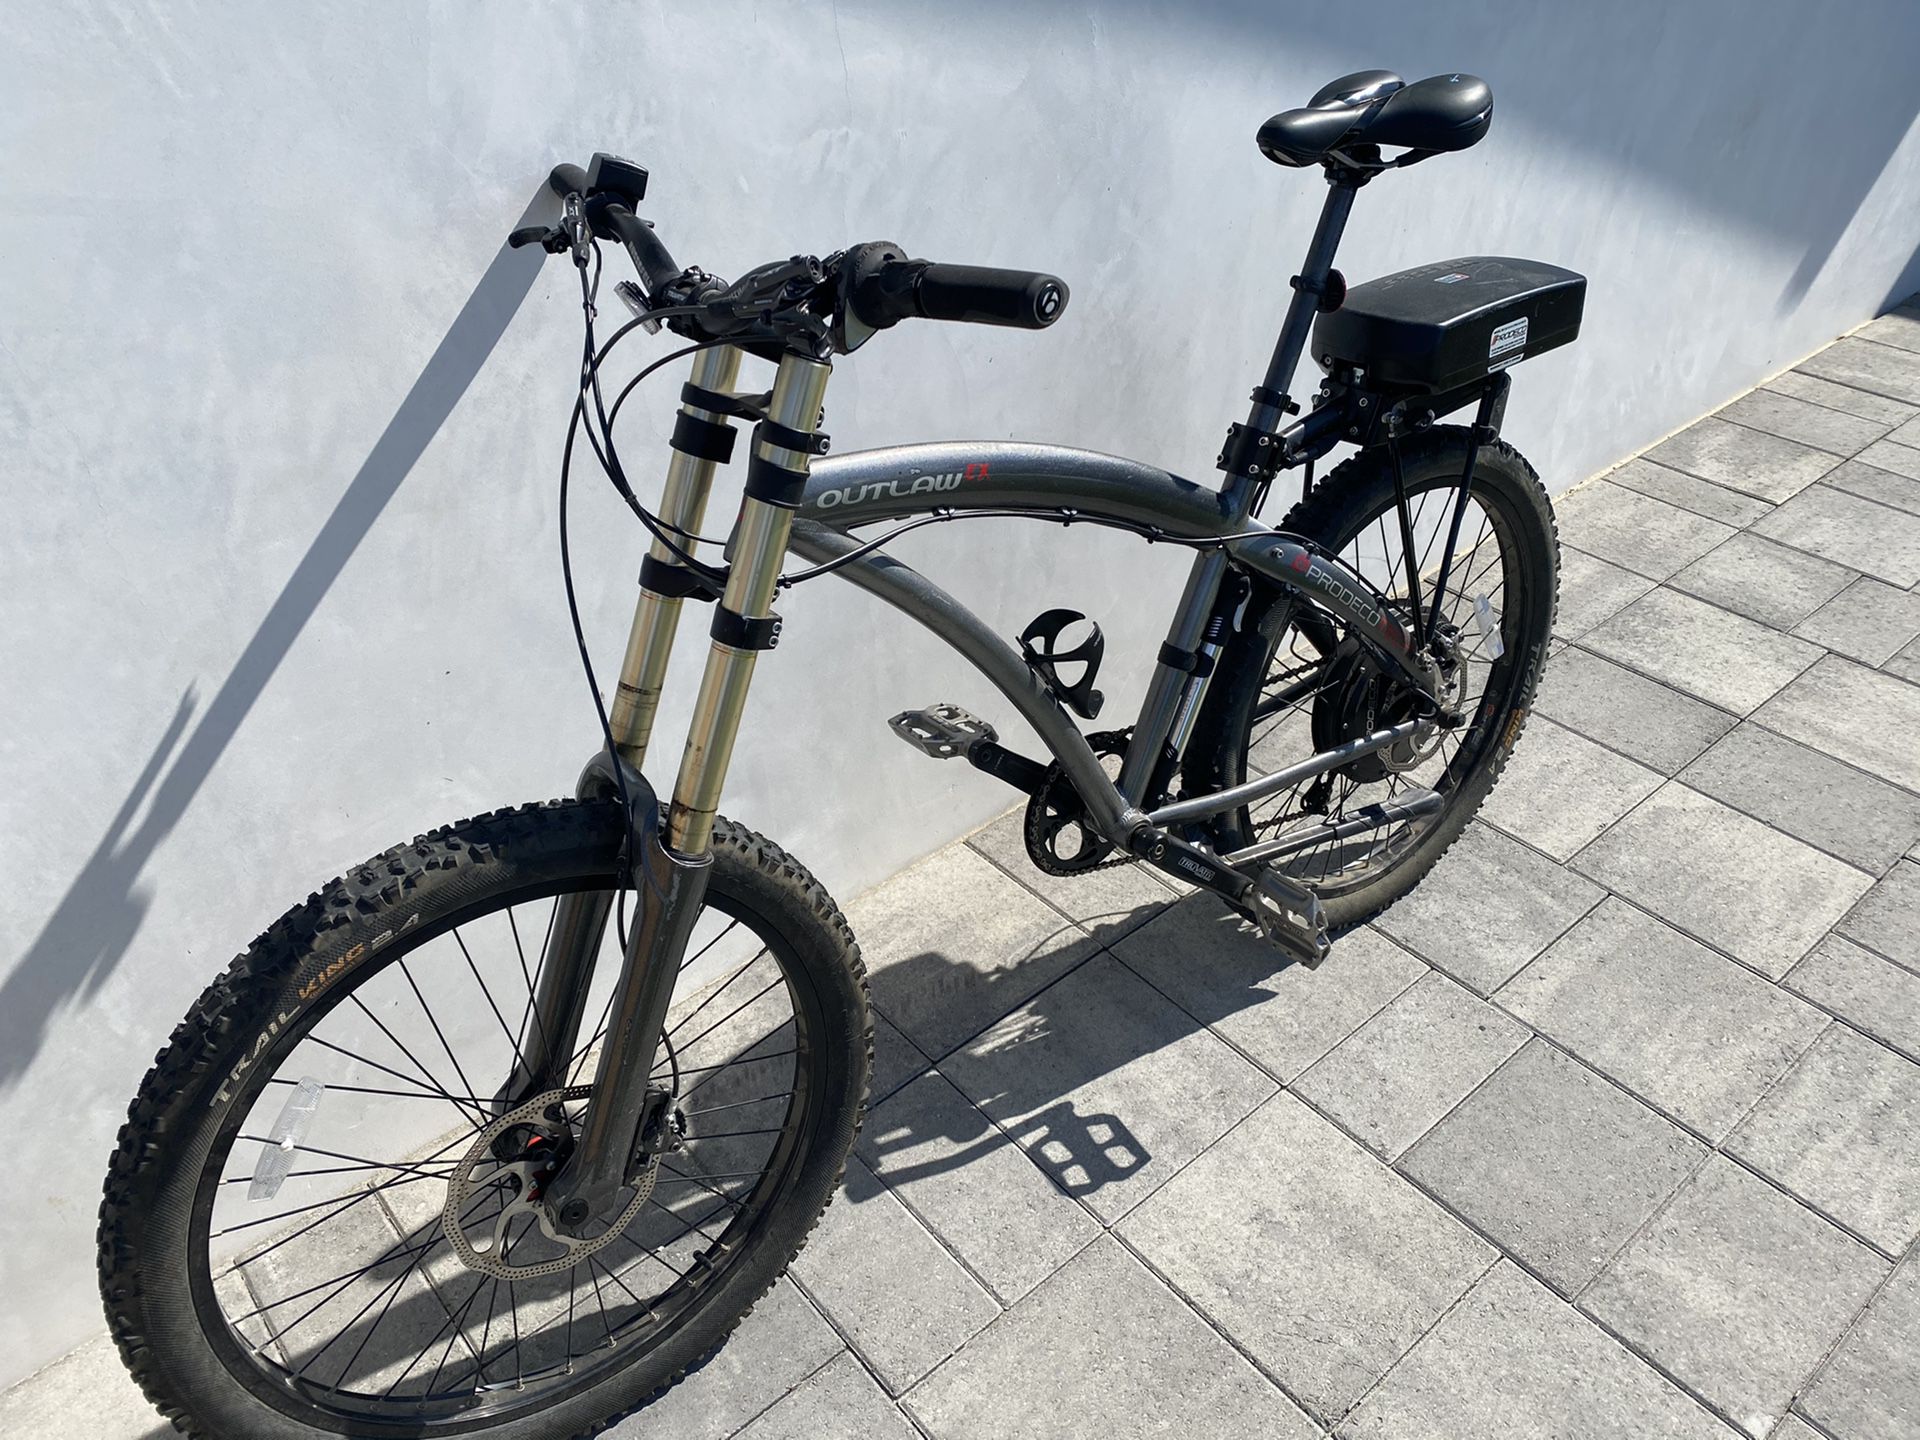 Electric Mountain Bike Prodeco Outlaw EX Long travel front suspension, Shimano XT disk brakes, tire pump, gel seat, kickstand. Electric mountain bike